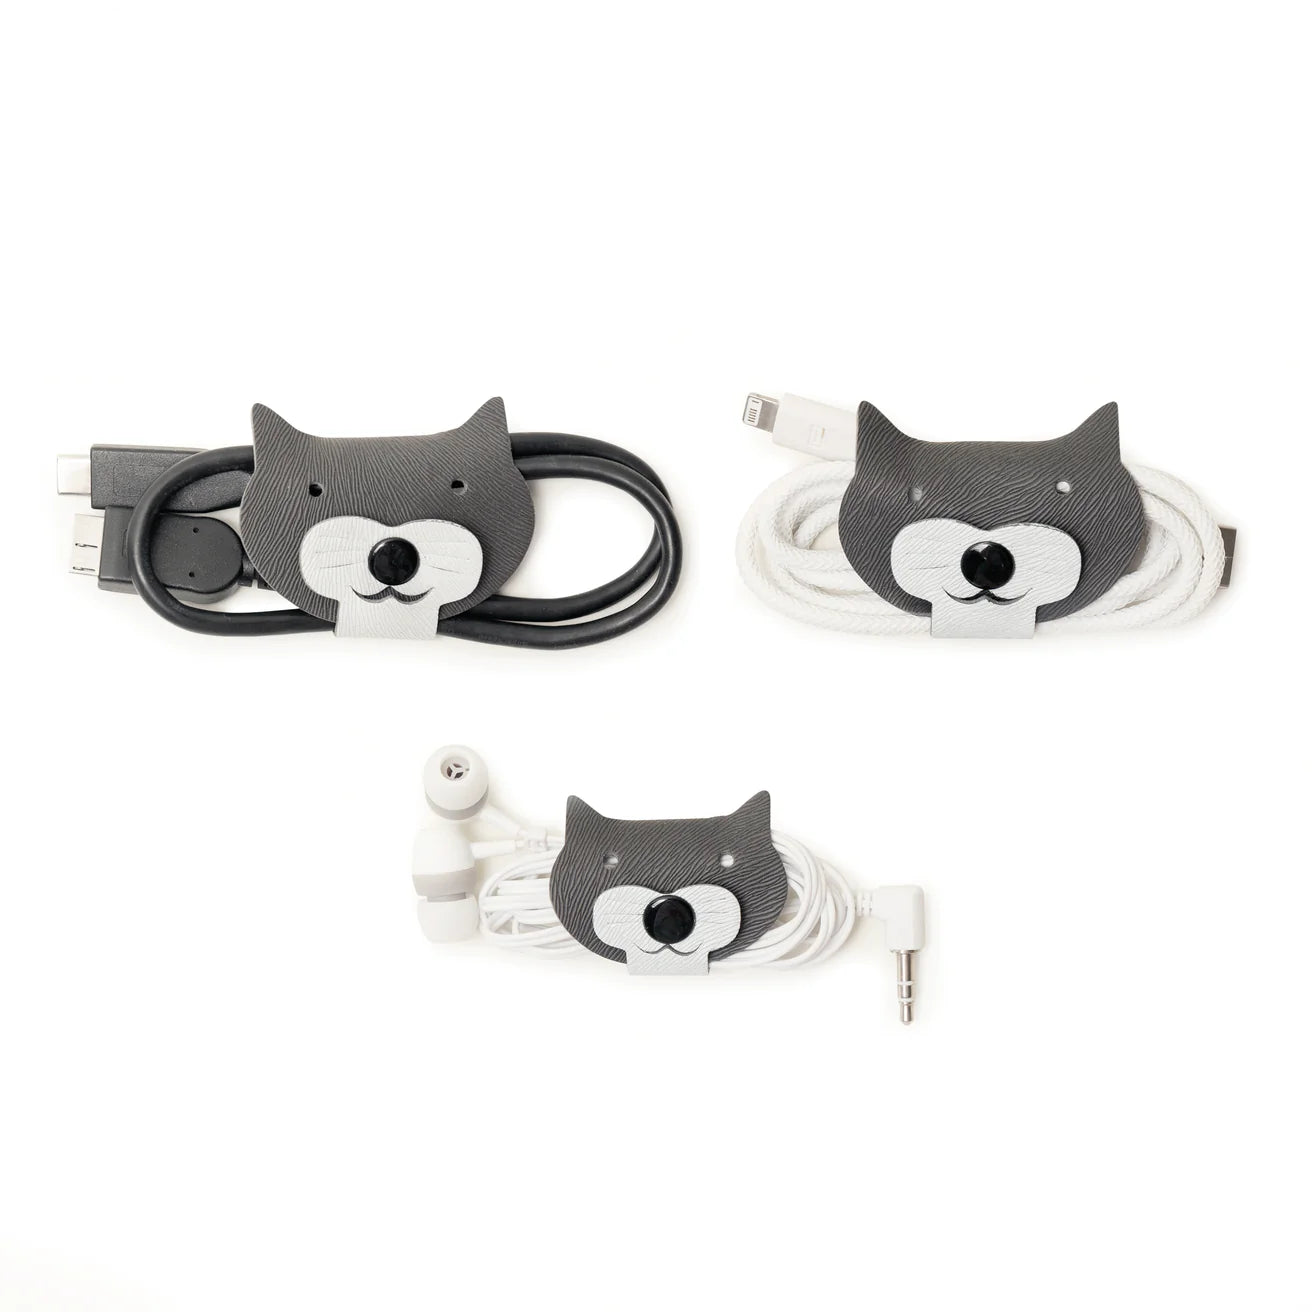 Kikkerland Cat Cable Ties